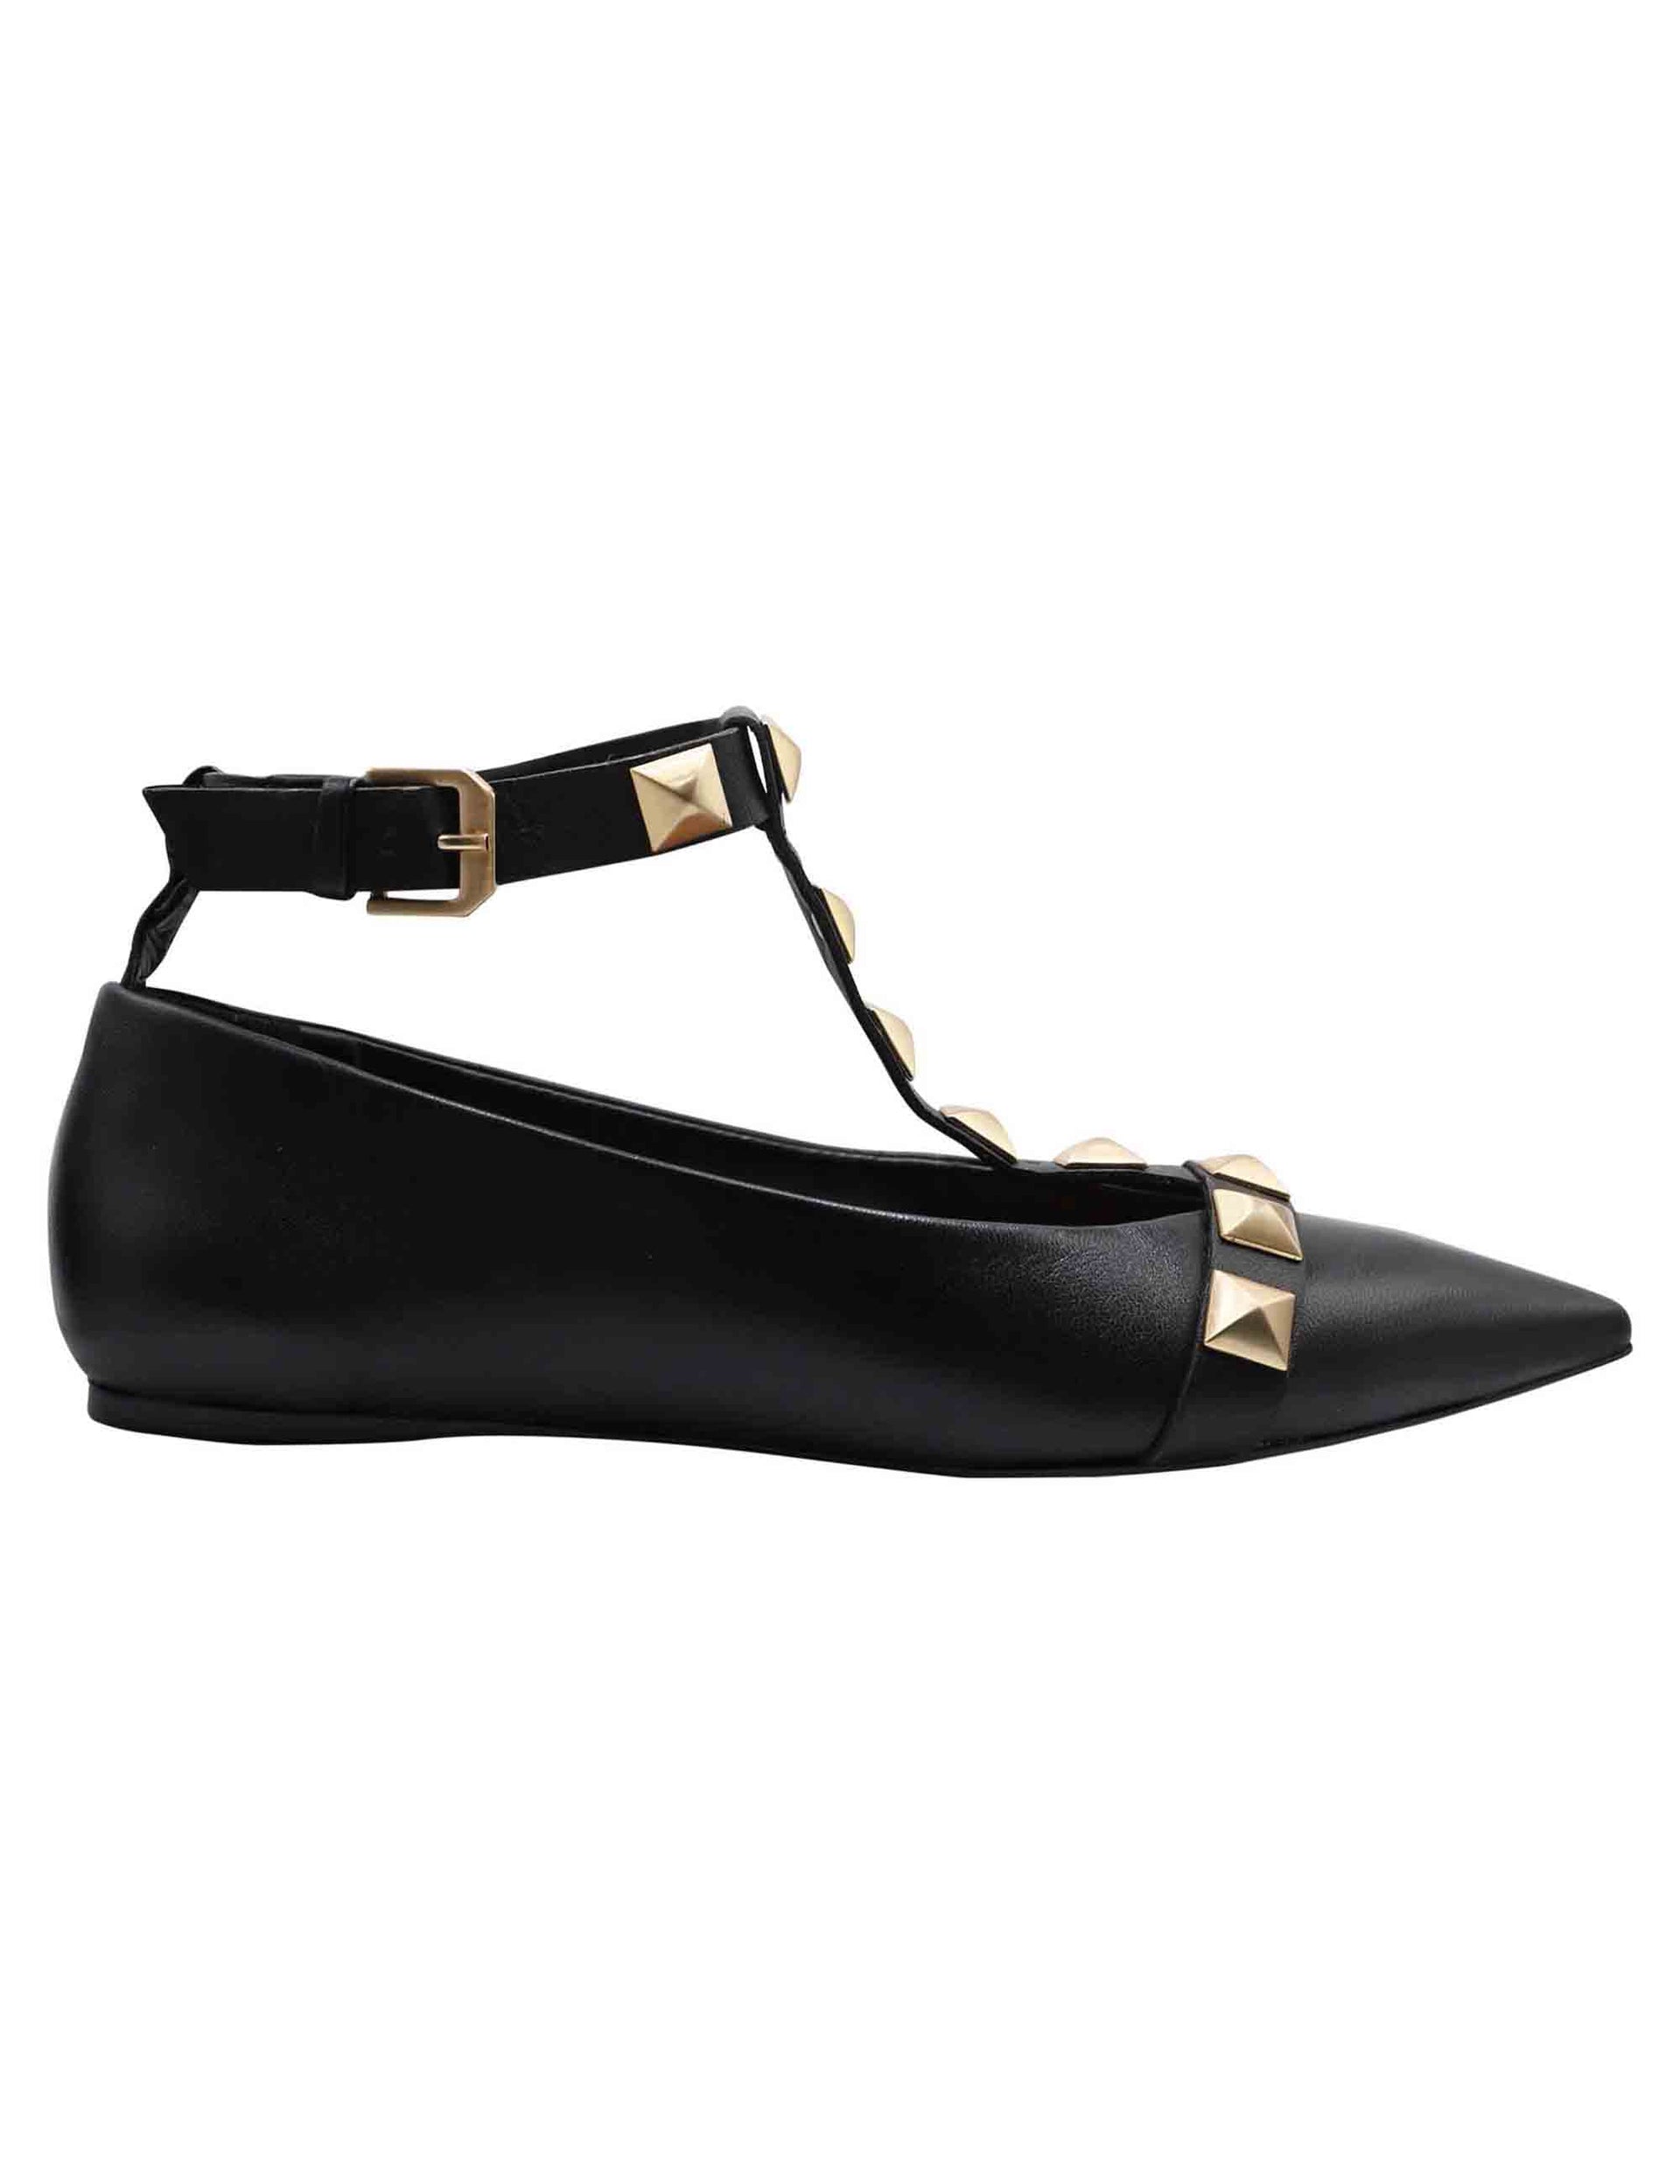 Women's black leather ballet flats with pointed toe straps and studs